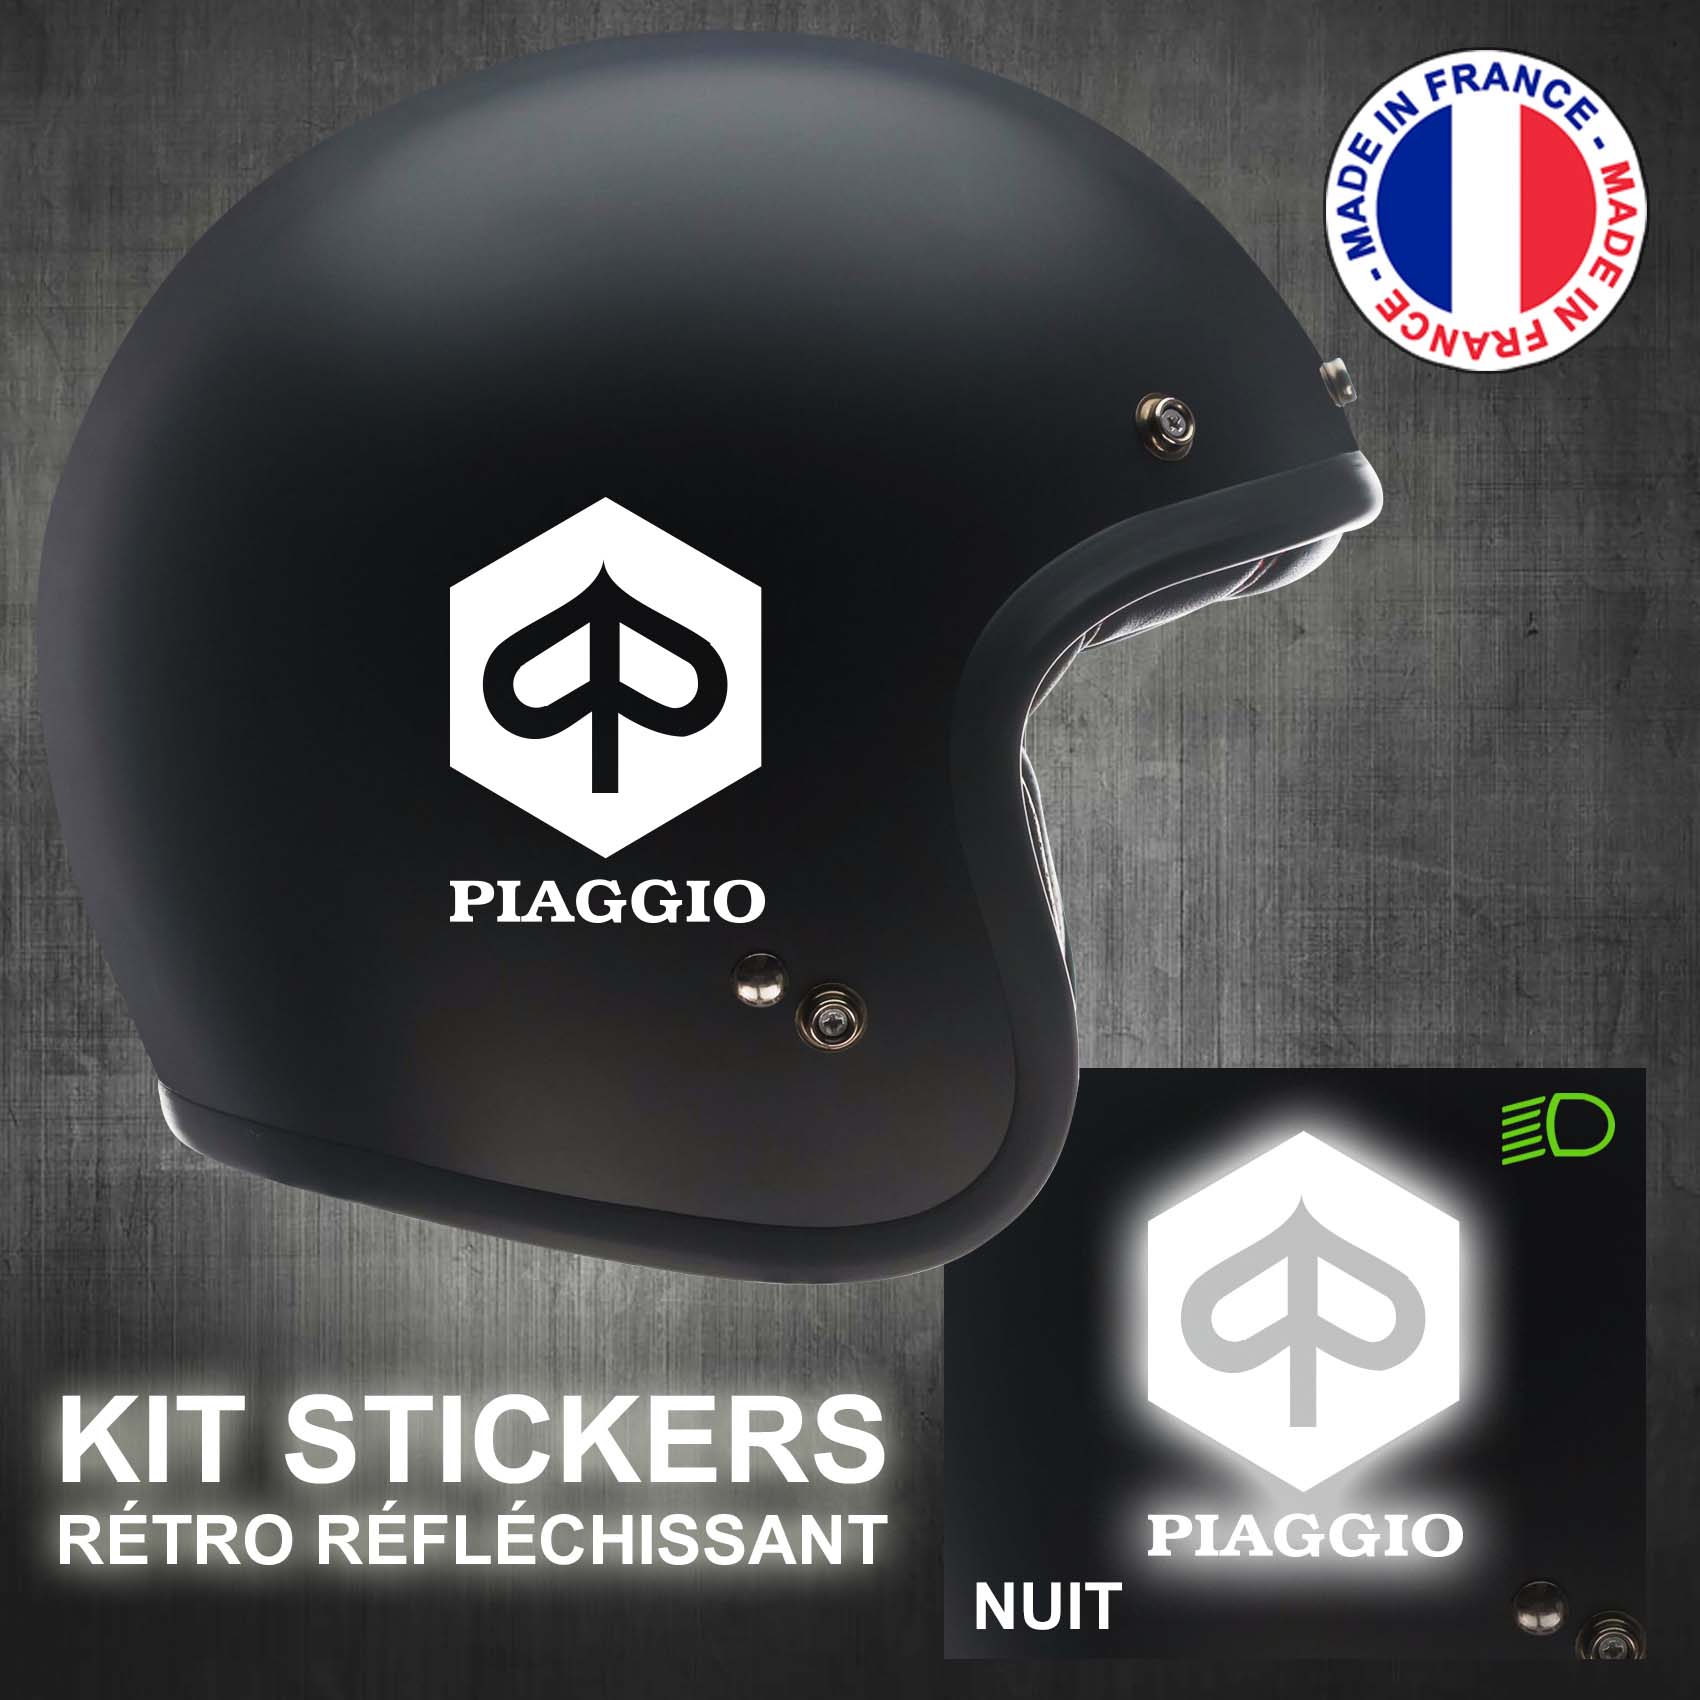 stickers-casque-moto-piaggio-ref1-retro-reflechissant-autocollant-noir-moto-velo-tuning-racing-route-sticker-casques-adhesif-scooter-nuit-securite-decals-personnalise-personnalisable-min